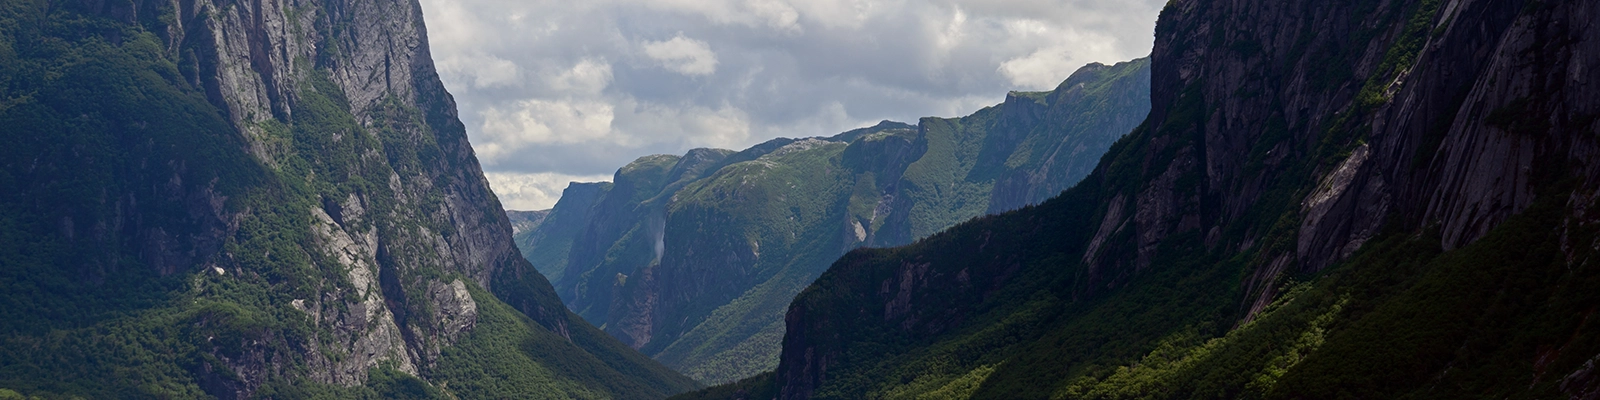 Scenic view of Gros Morne National Park with lush green forests and majestic mountains in the background